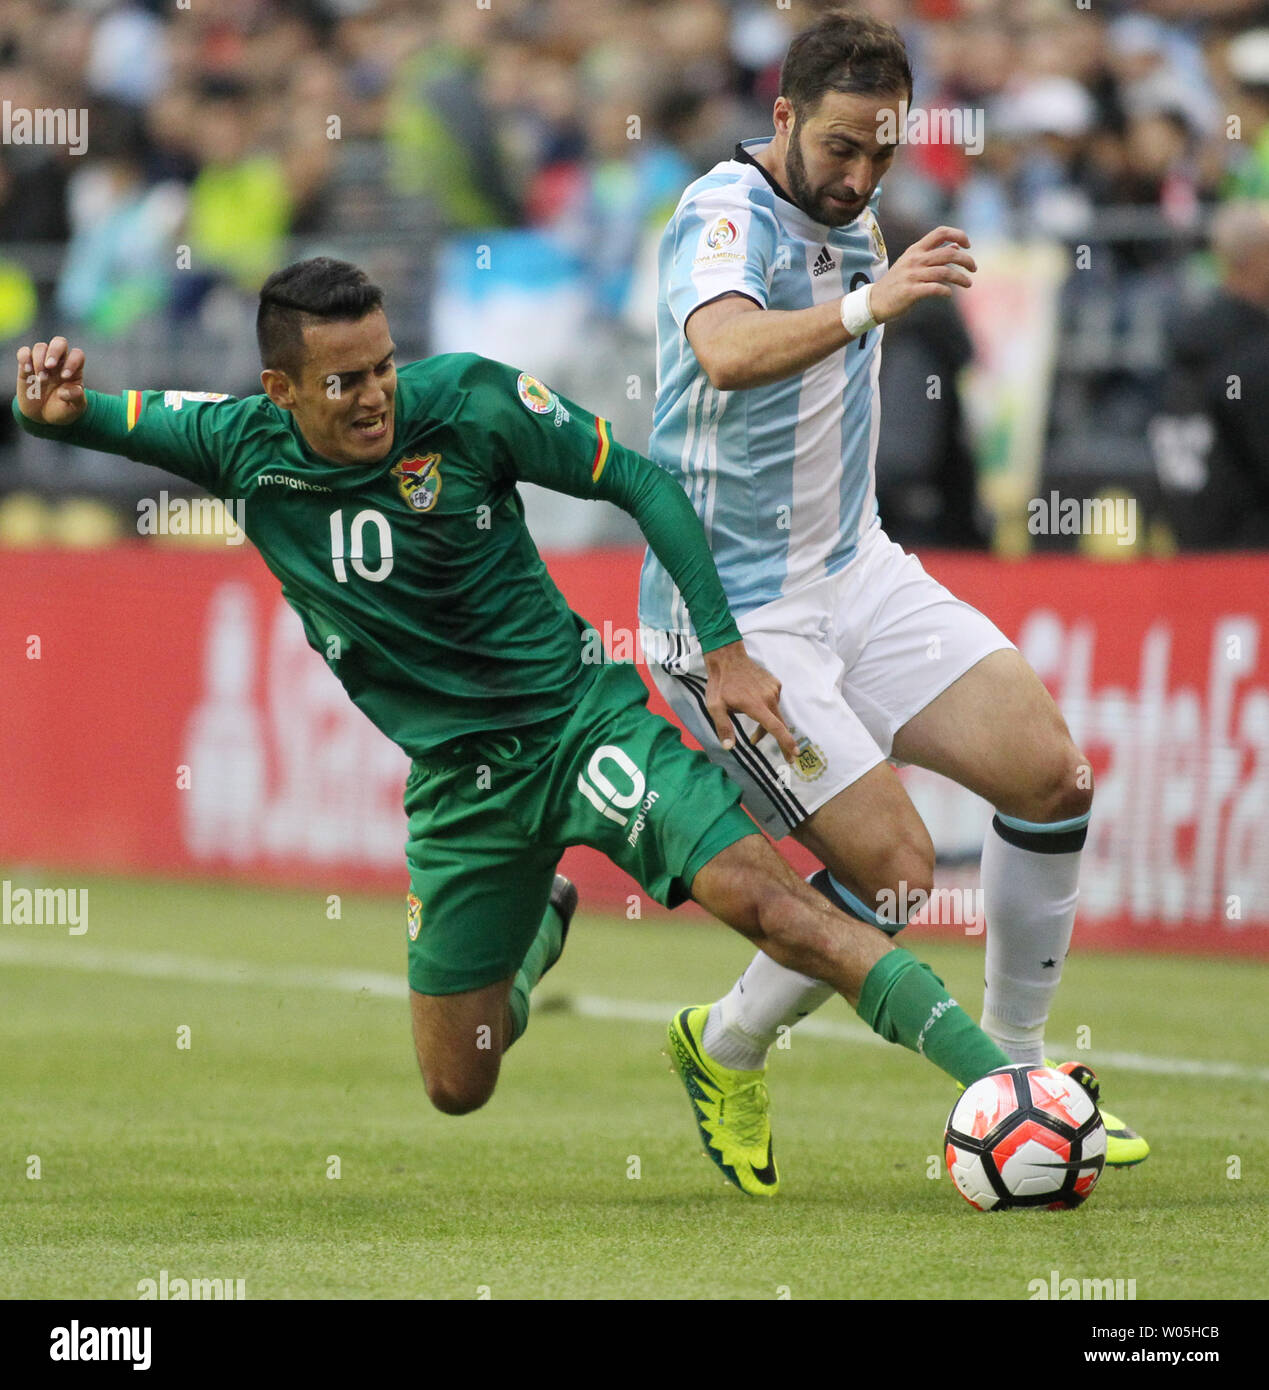 Bolivia's Jhasmani Campos (10) defends against Argentina's Ezequiet Lavezzi (22) in a 2016 Copa America Centenario soccer match at CenturyLink Field in Seattle, Washington on June 14, 2016.  Lavezzi  scored a first half goal in the 3-0 win over Argentina 0.   Photo by Jim Bryant/ UPI Stock Photo